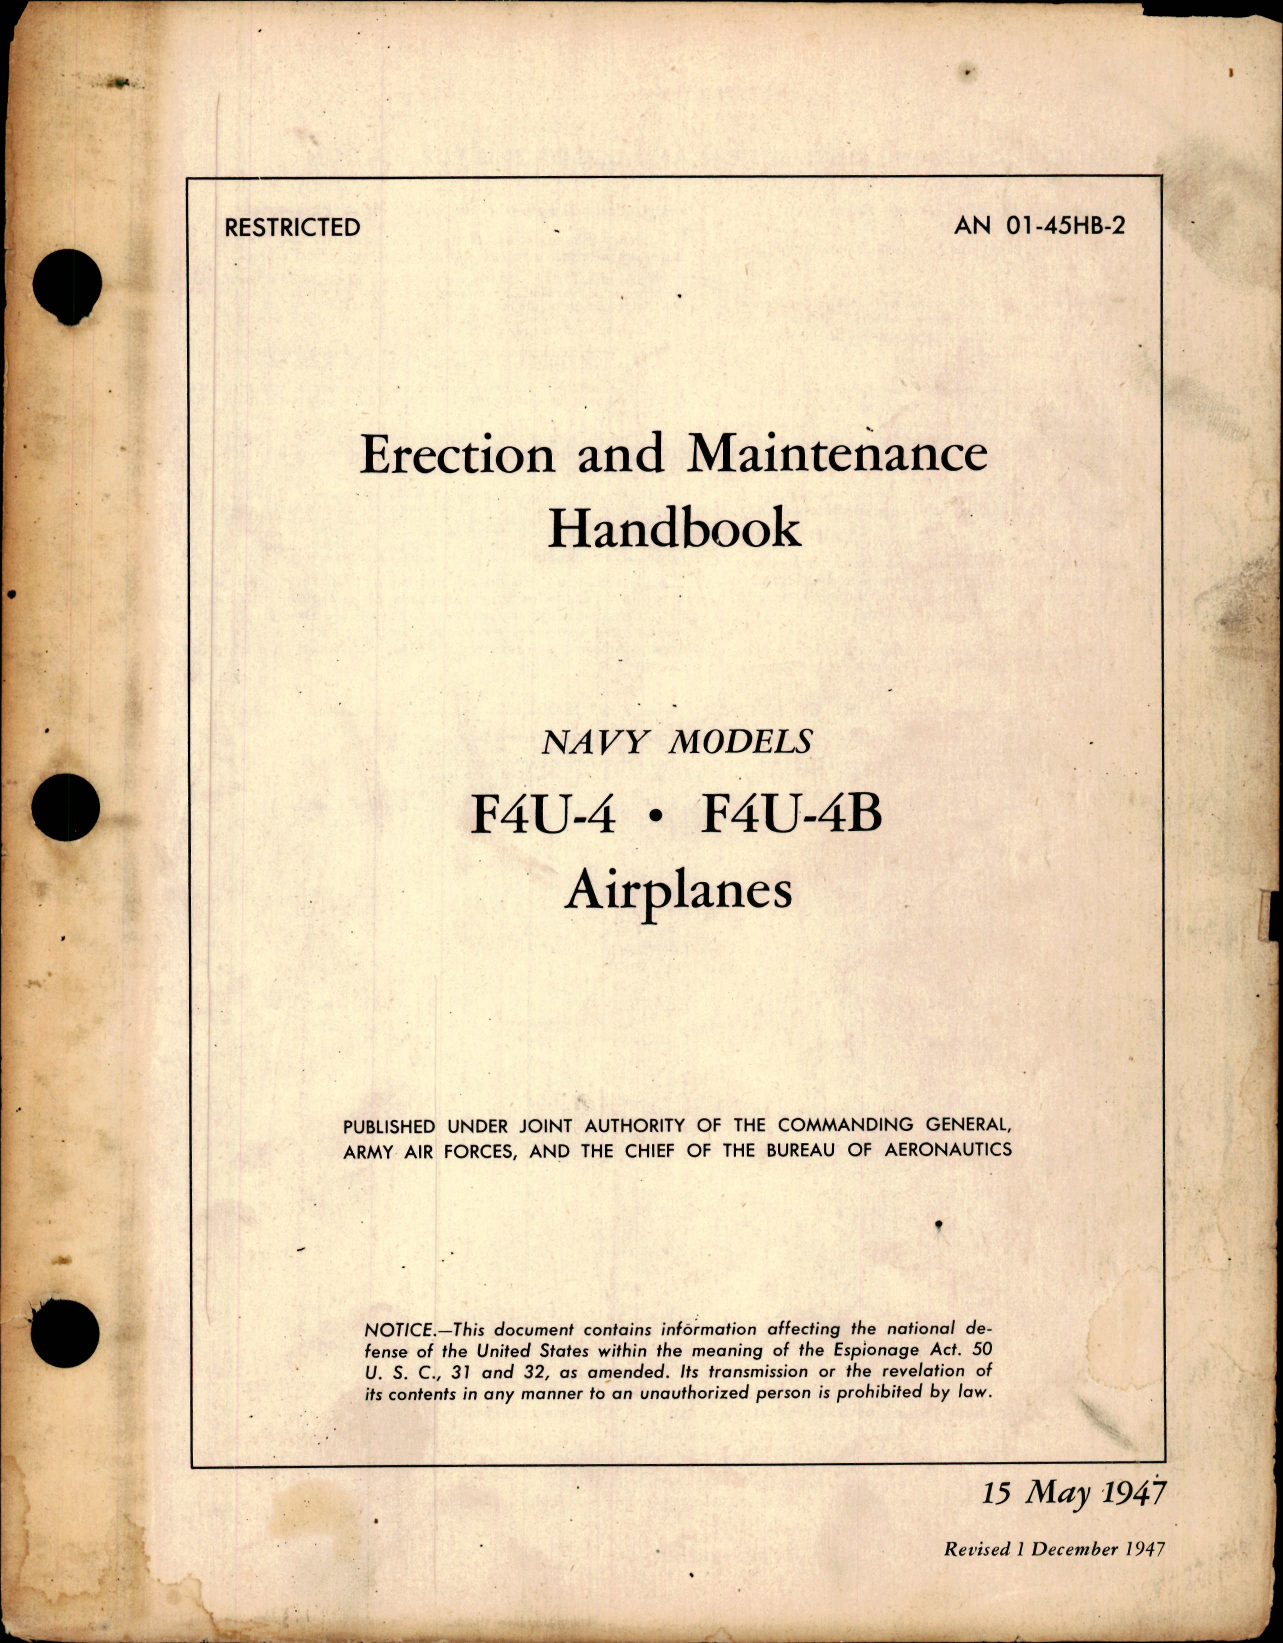 Sample page 1 from AirCorps Library document: Erection and Maintenance Handbook for F4U-4, F4U-4B